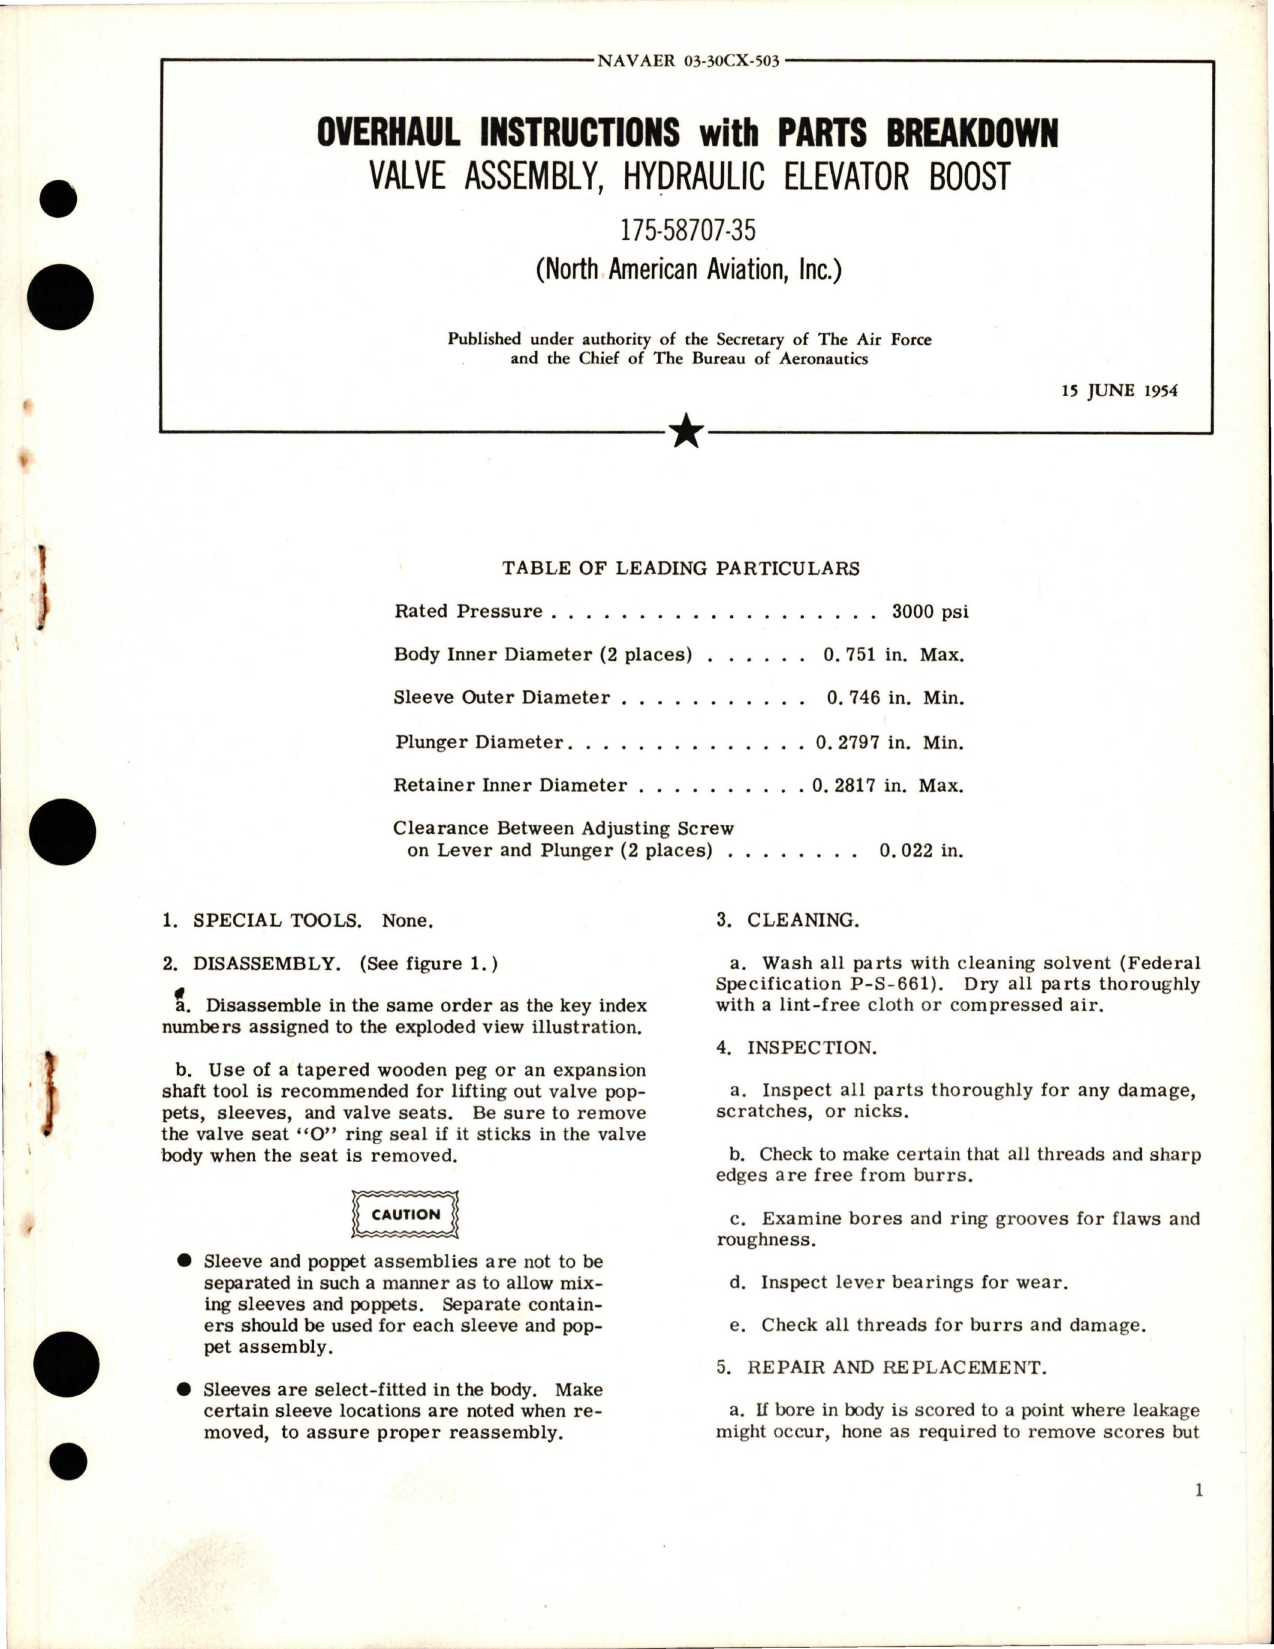 Sample page 1 from AirCorps Library document: Overhaul Instructions with Parts Breakdown for Hydraulic Elevator Boost Valve Assembly - 175-58707-35 